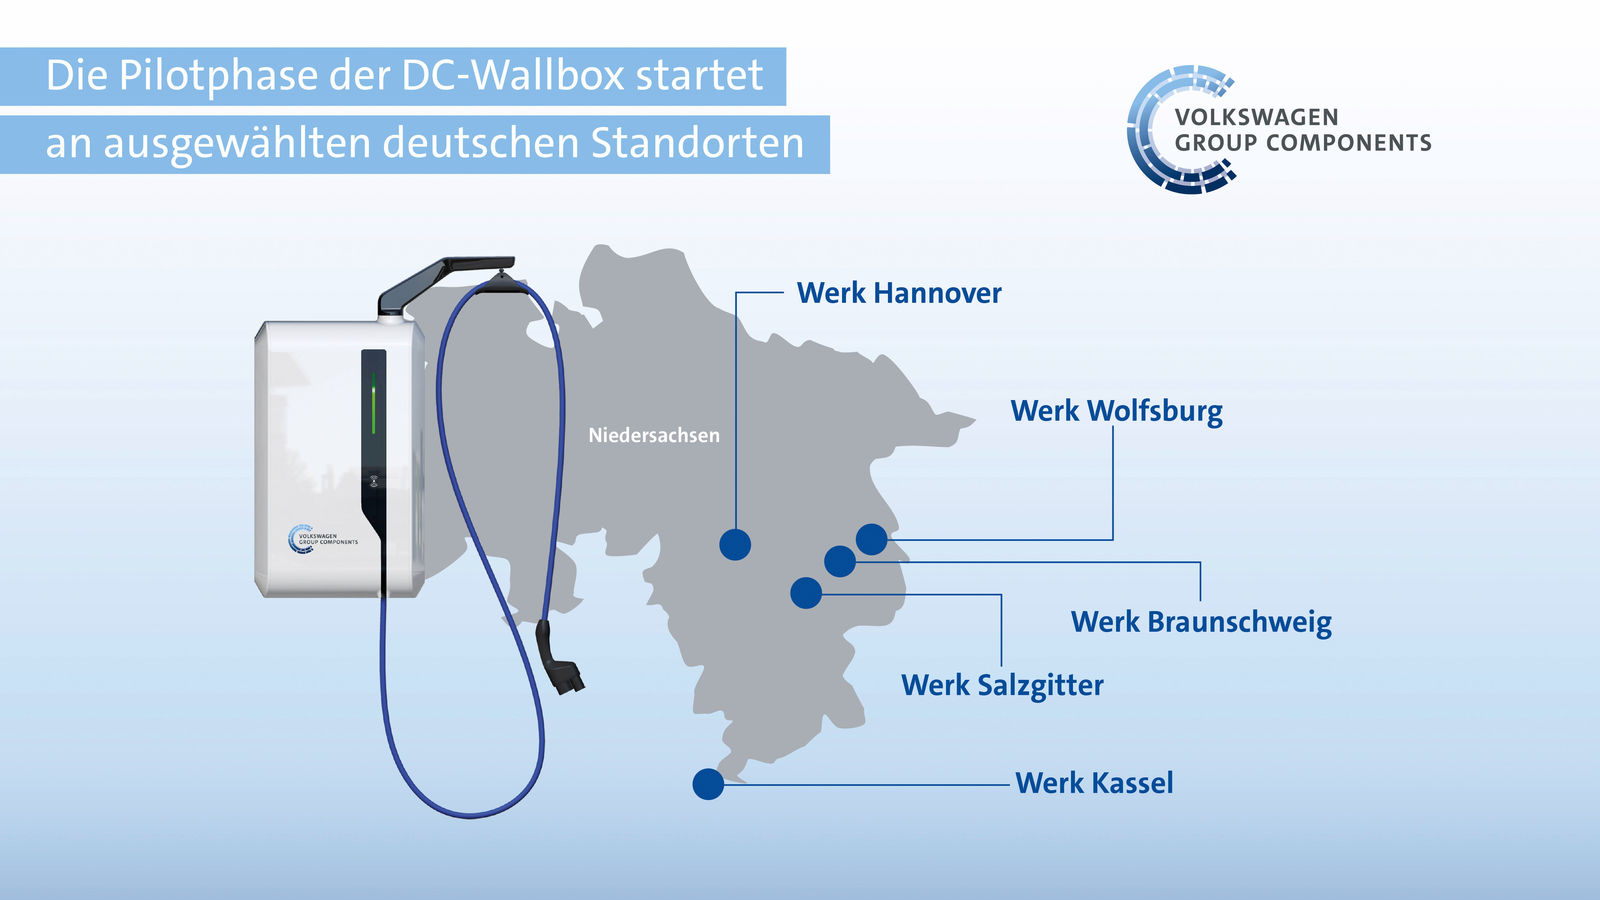 Pilot phase for innovative DC wallbox has started